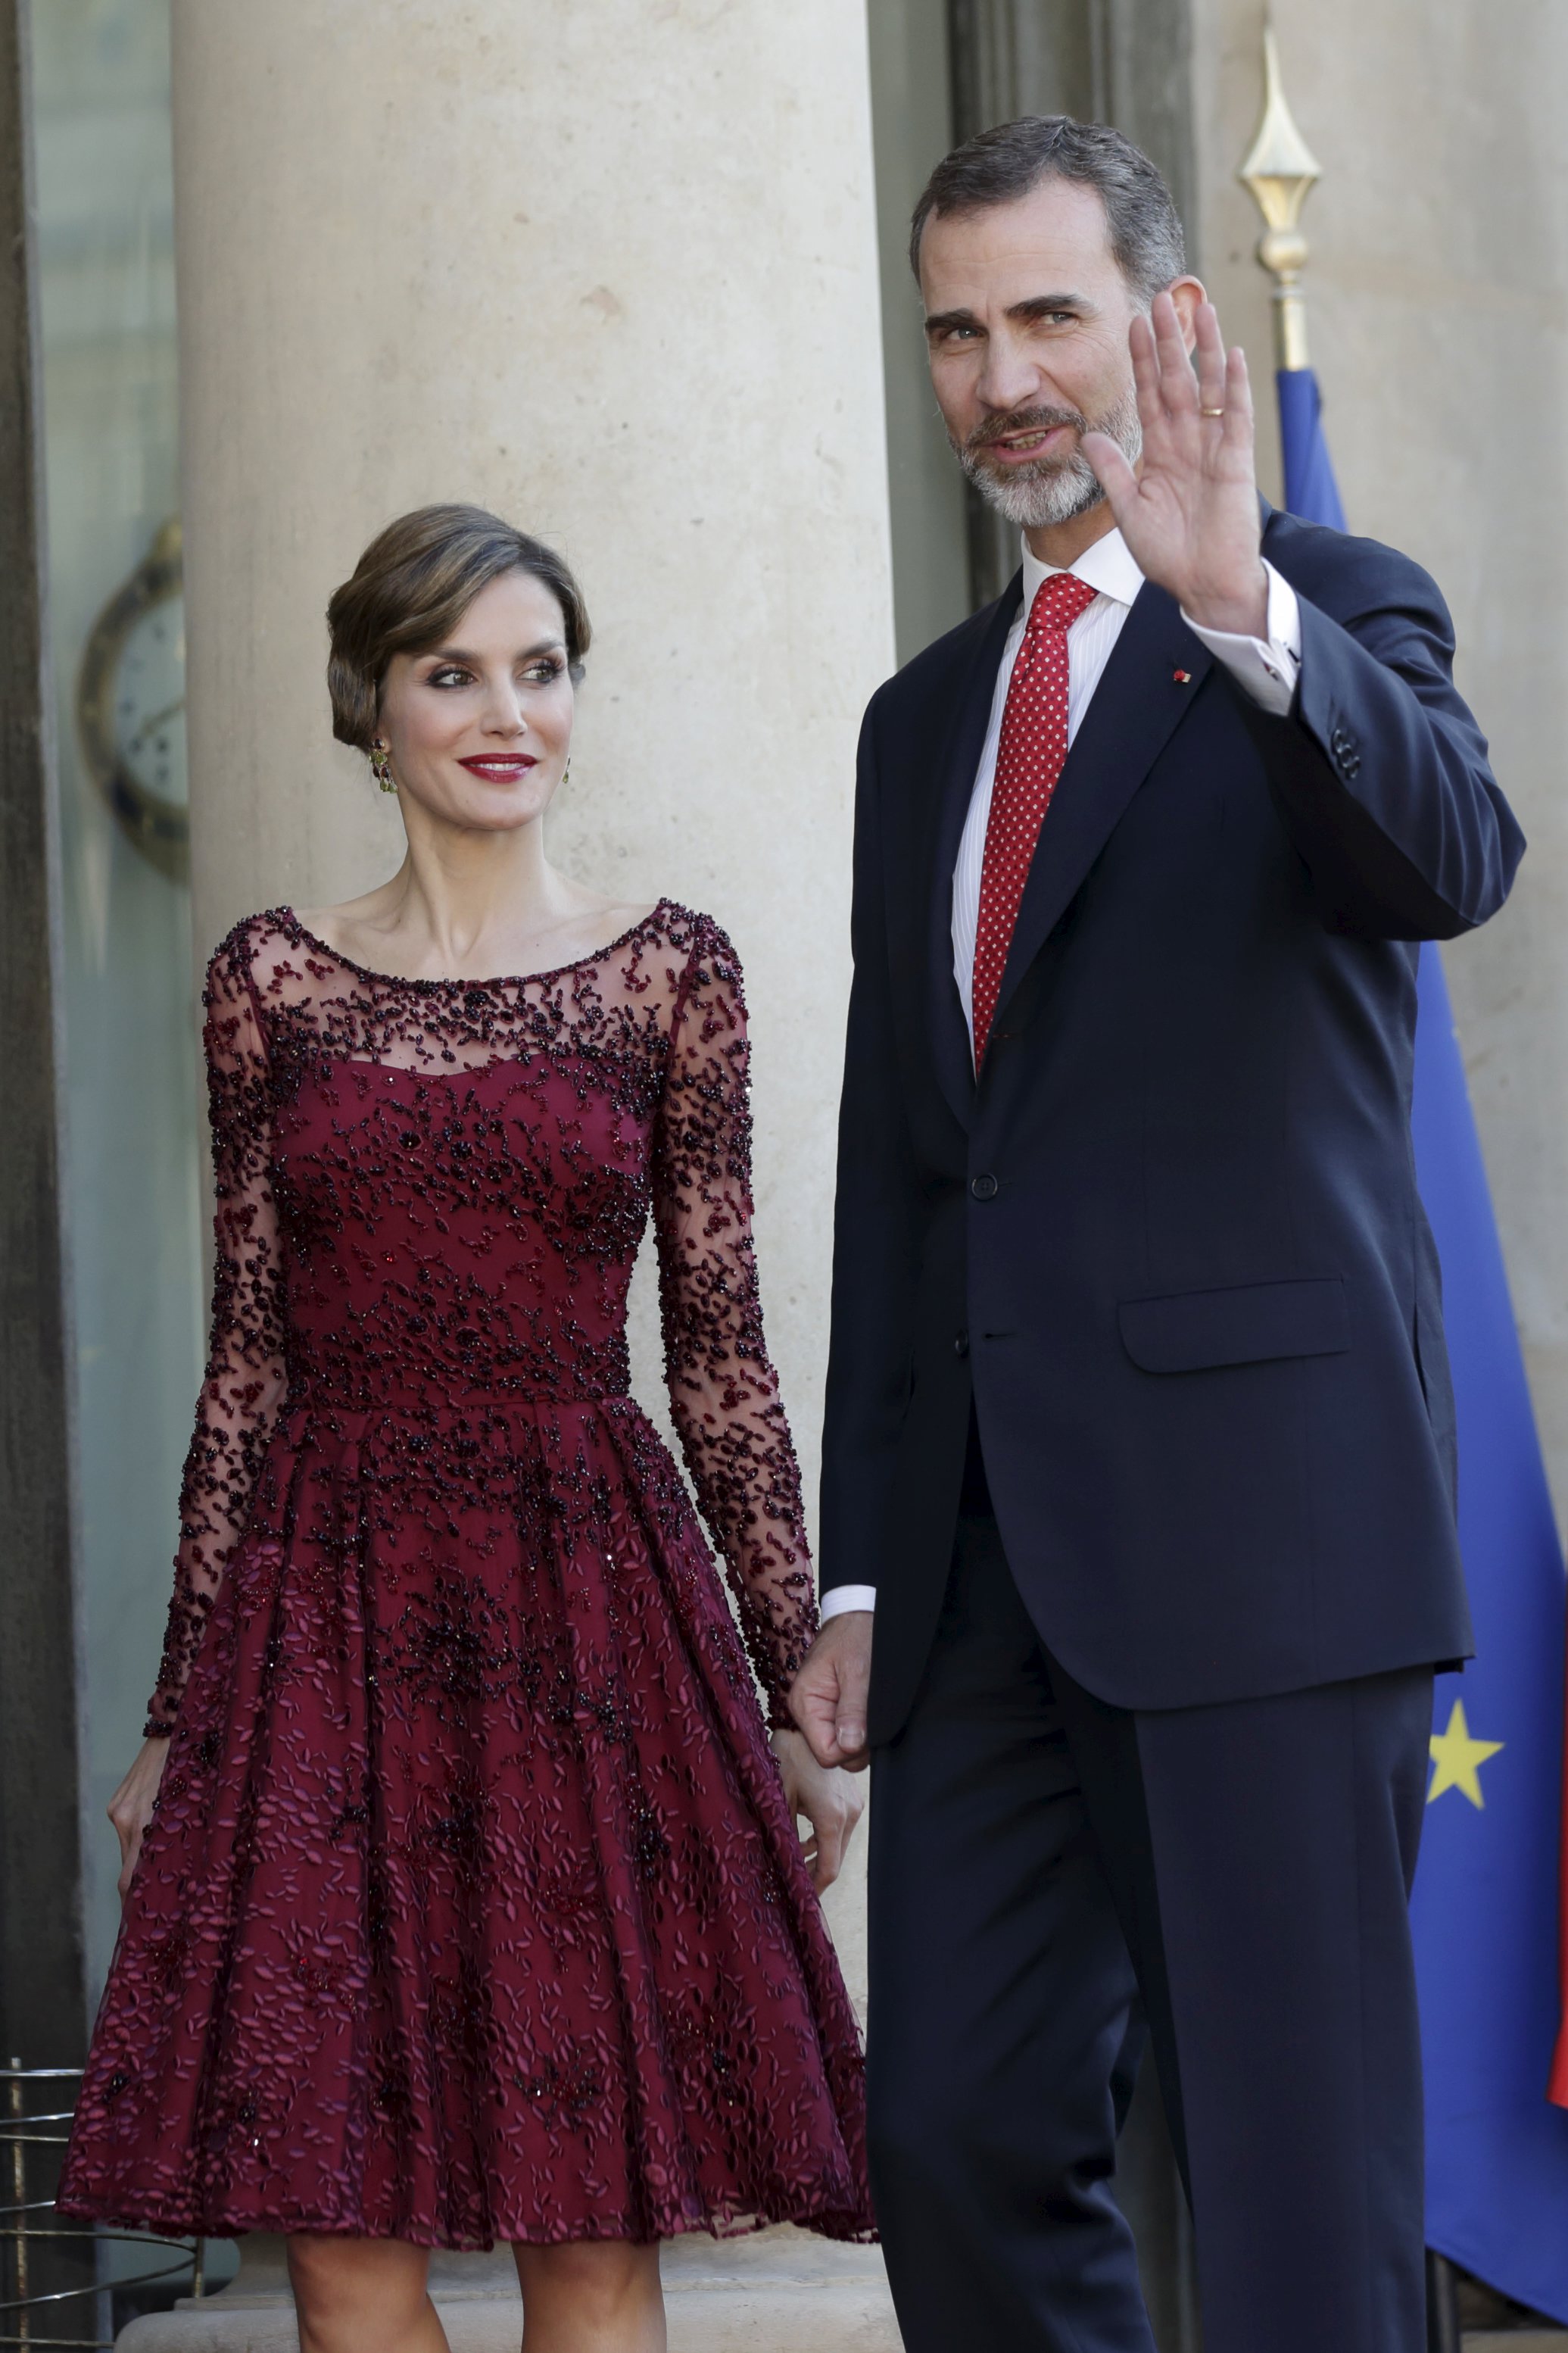 Spain's King Felipe VI and Queen Letizia arrive for a state dinner at the Elysee Palace in Paris, France